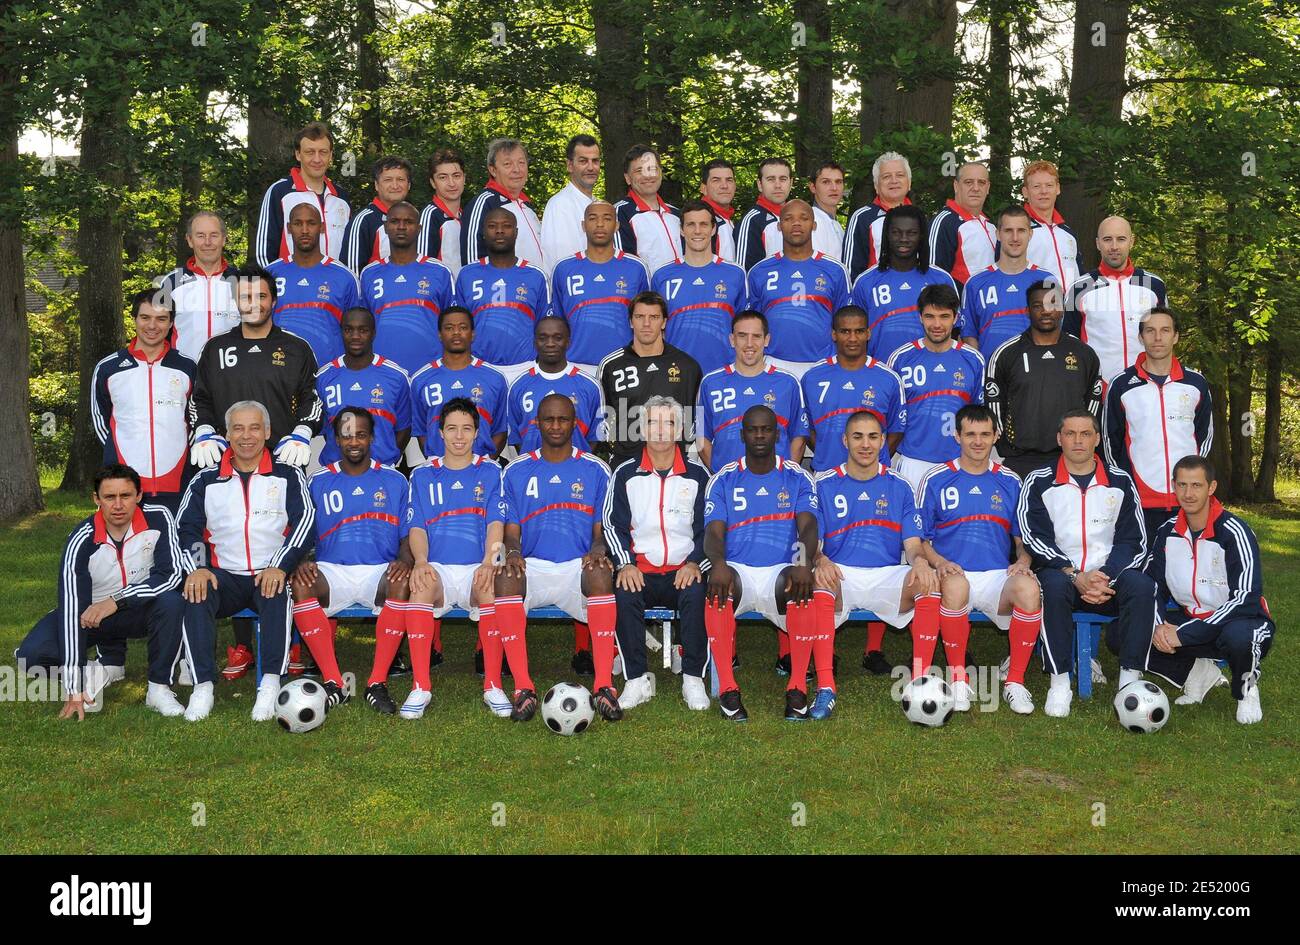 France's national team soccer players who are participating in the Euro 2008 tournament pose for the official photo (First row, L-R, Sidney Govou, Samir Nasri, Patrick Vieira, Raymond Domenech, Lilian Thuram, Karim Benzema and Willy Sagnol. Second row, L-R, Sebastien Frey Lassana Diarra, Patrice Evra Claude Makelele, Gregory Coupet, Franck Ribery, Florent Malouda, Jeremy Toulalan and Steve Mandanda. Third row, L-R, Nicolas Anelka, Eric Abidal, William Gallas, Thierry Henry, Francois Clerc, Jean-Alain Boumsong, Bafetimbi Gomis and Francois Clerc in Clairefontaine, near Paris, France on June 1, Stock Photo